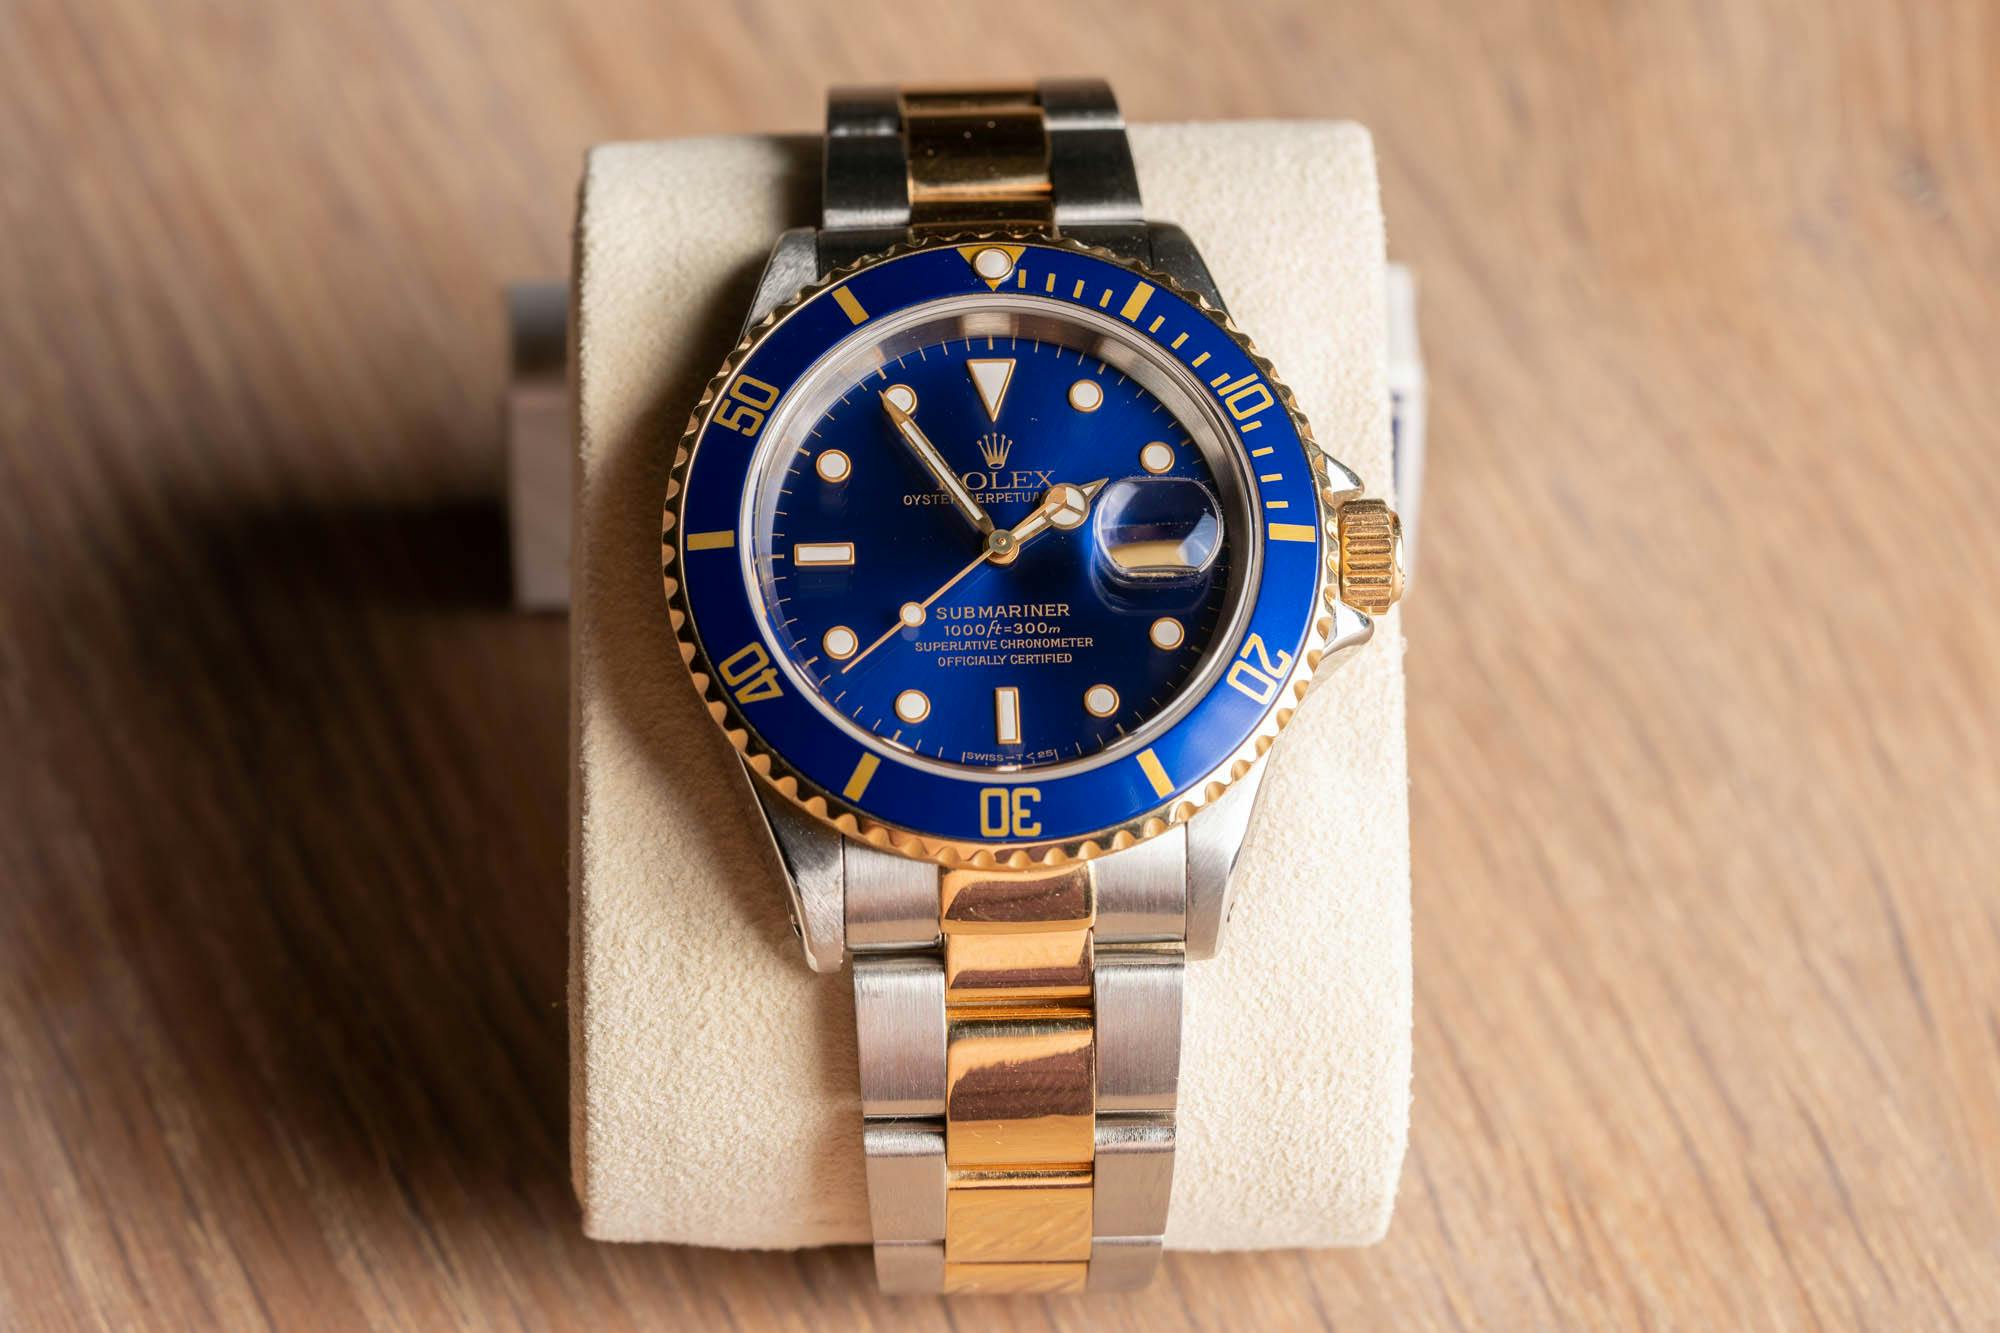 Mondia Plastic Watches for Sale in Online Auctions